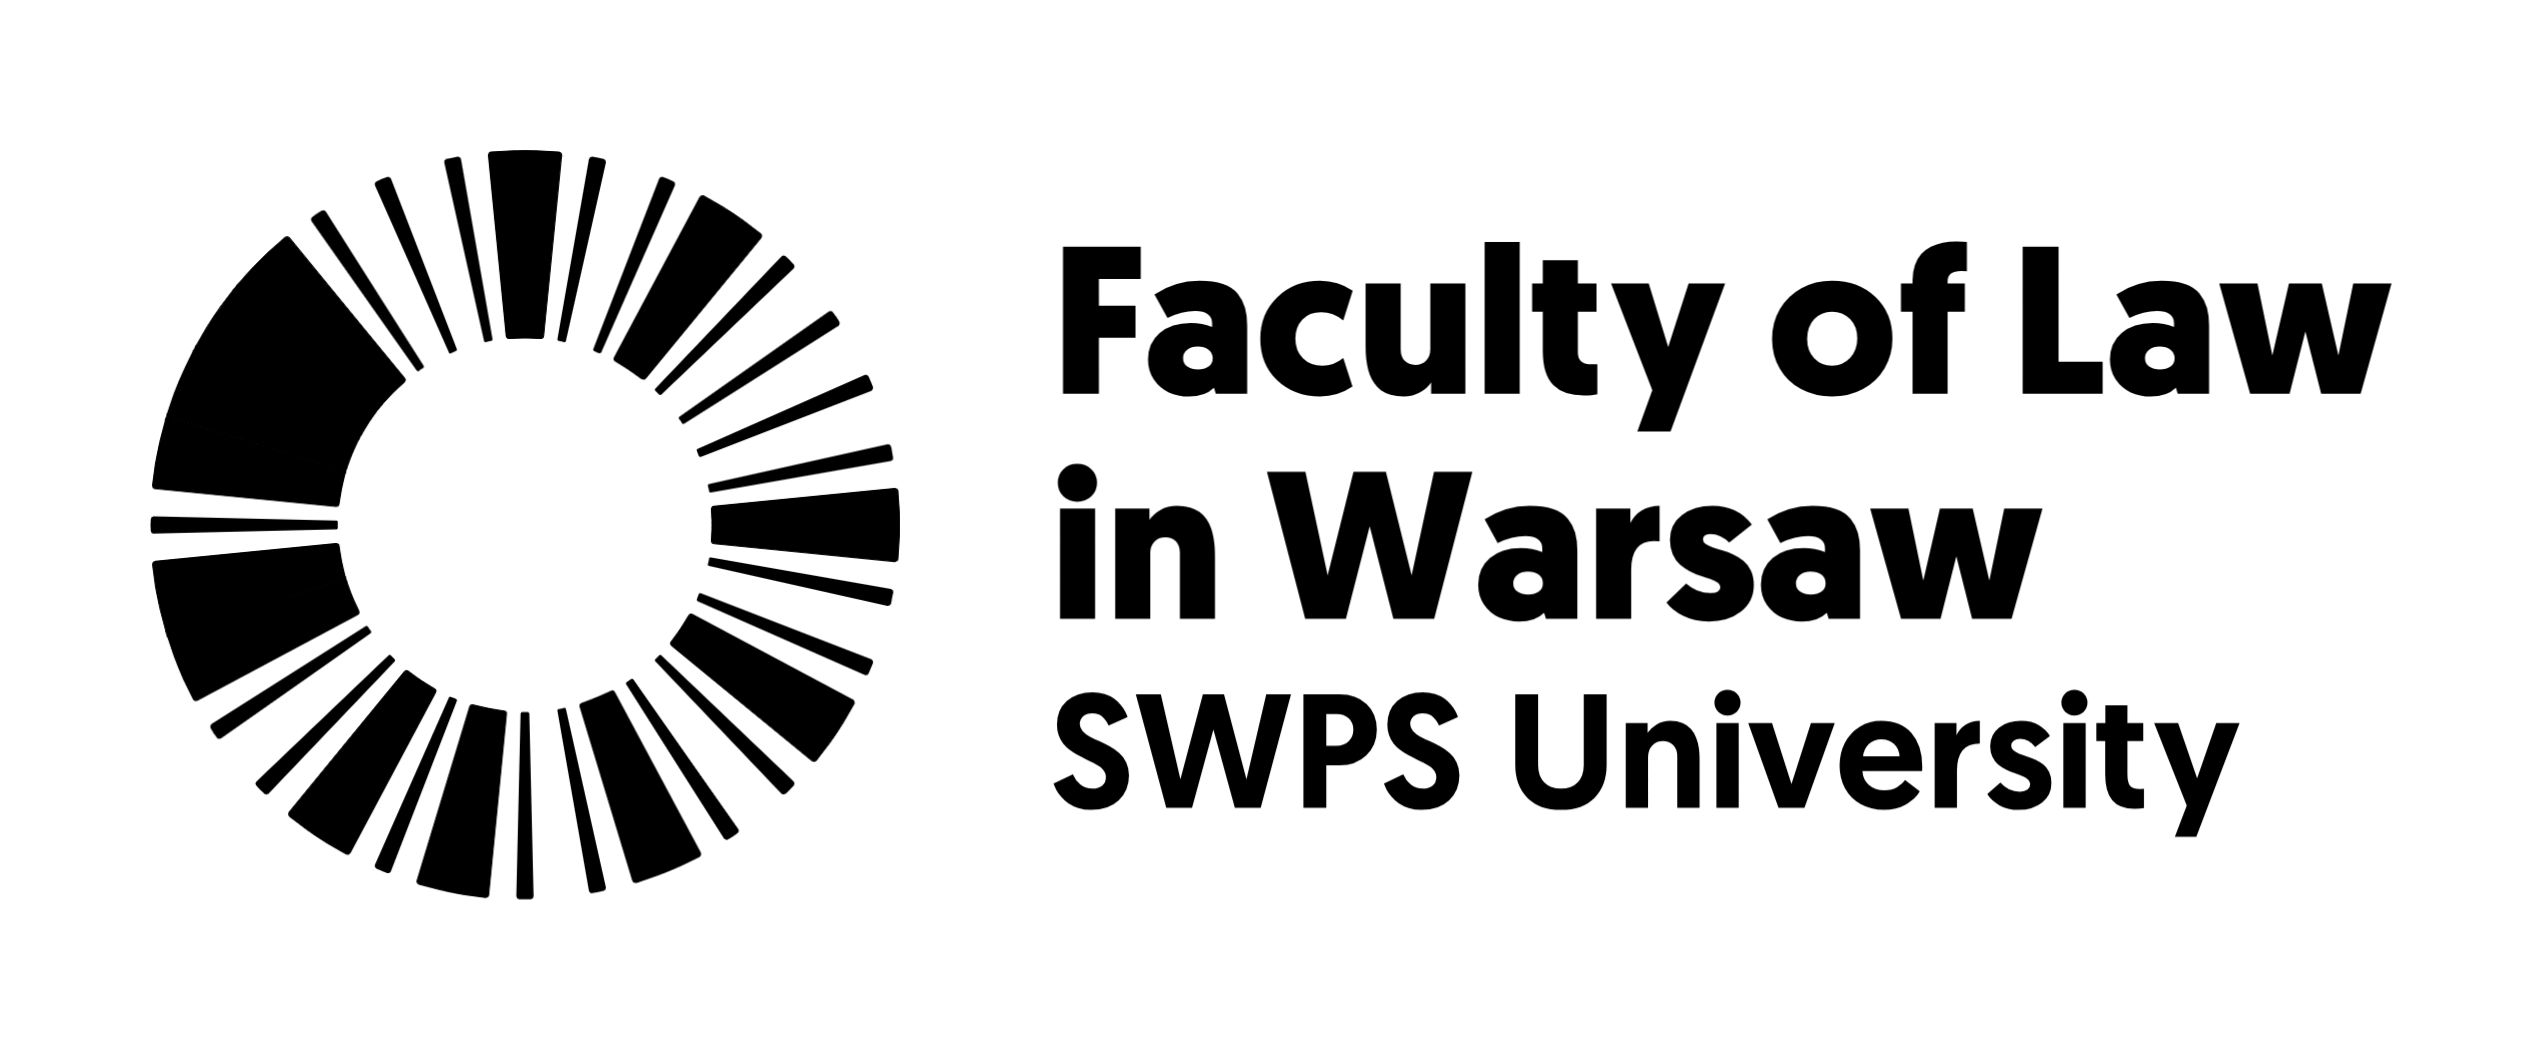 Faculty of Law in Warsaw logo